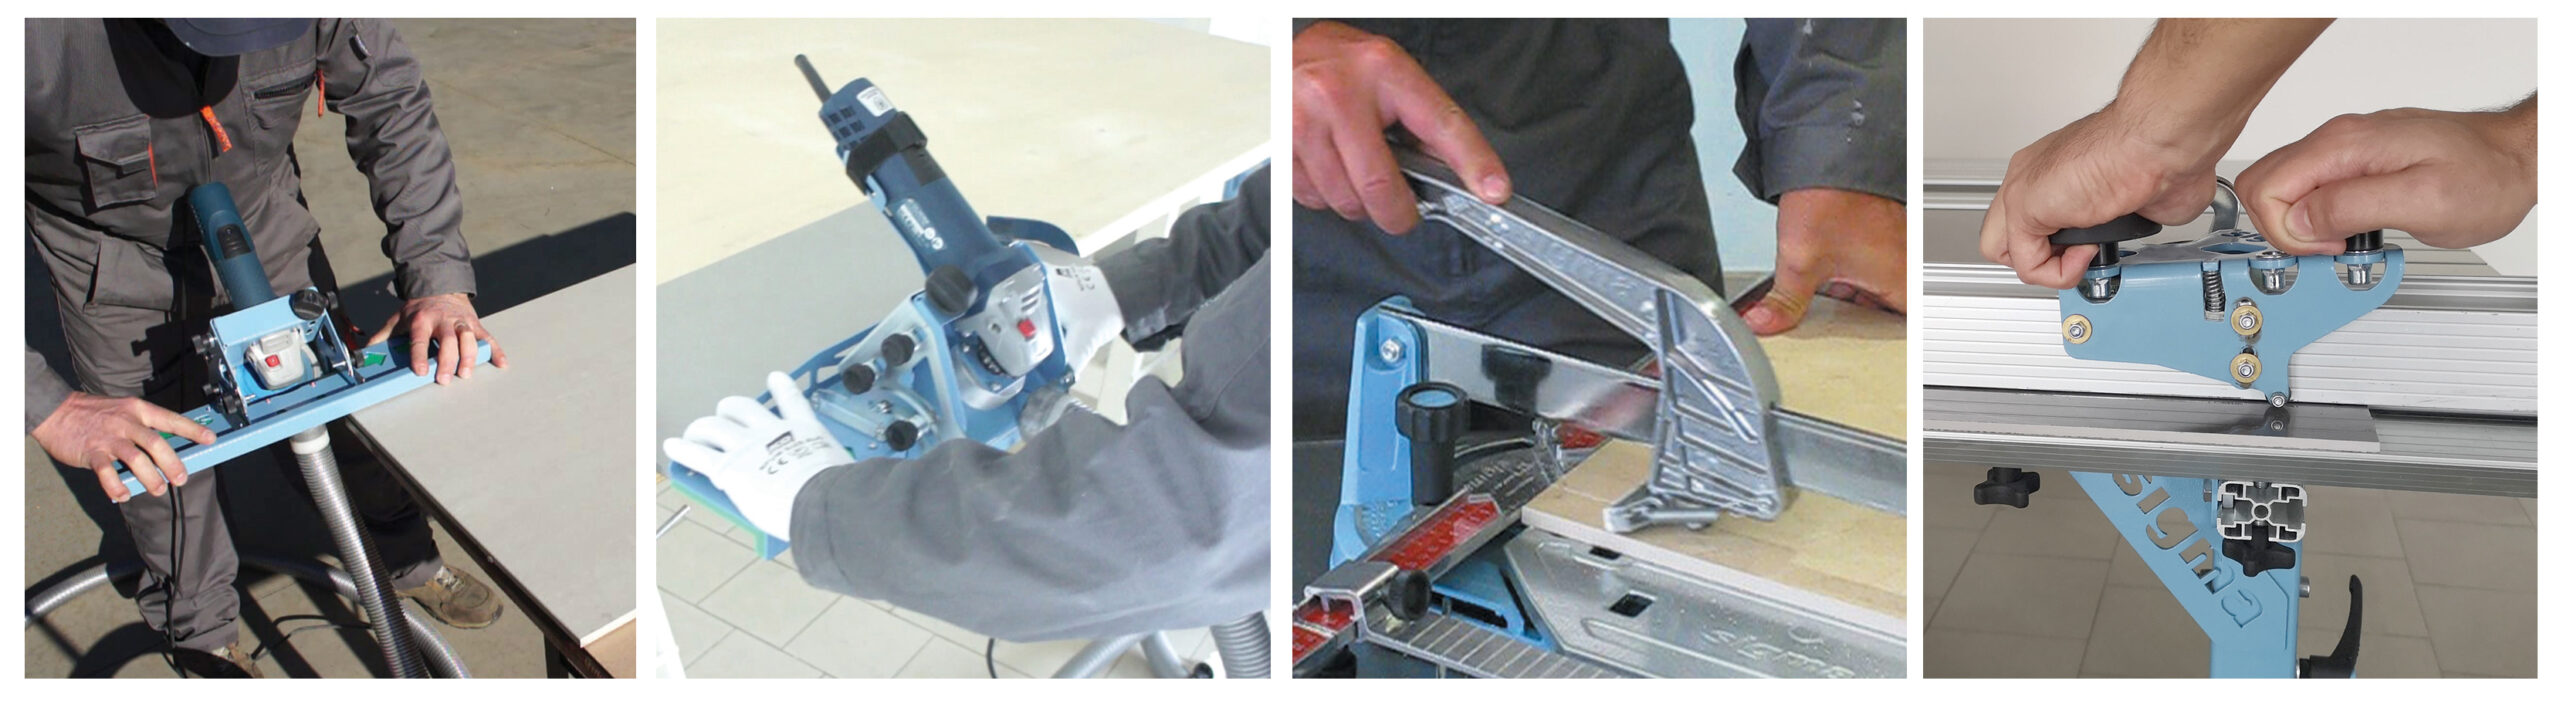 Sigma® Tile Cutting Tools Applications